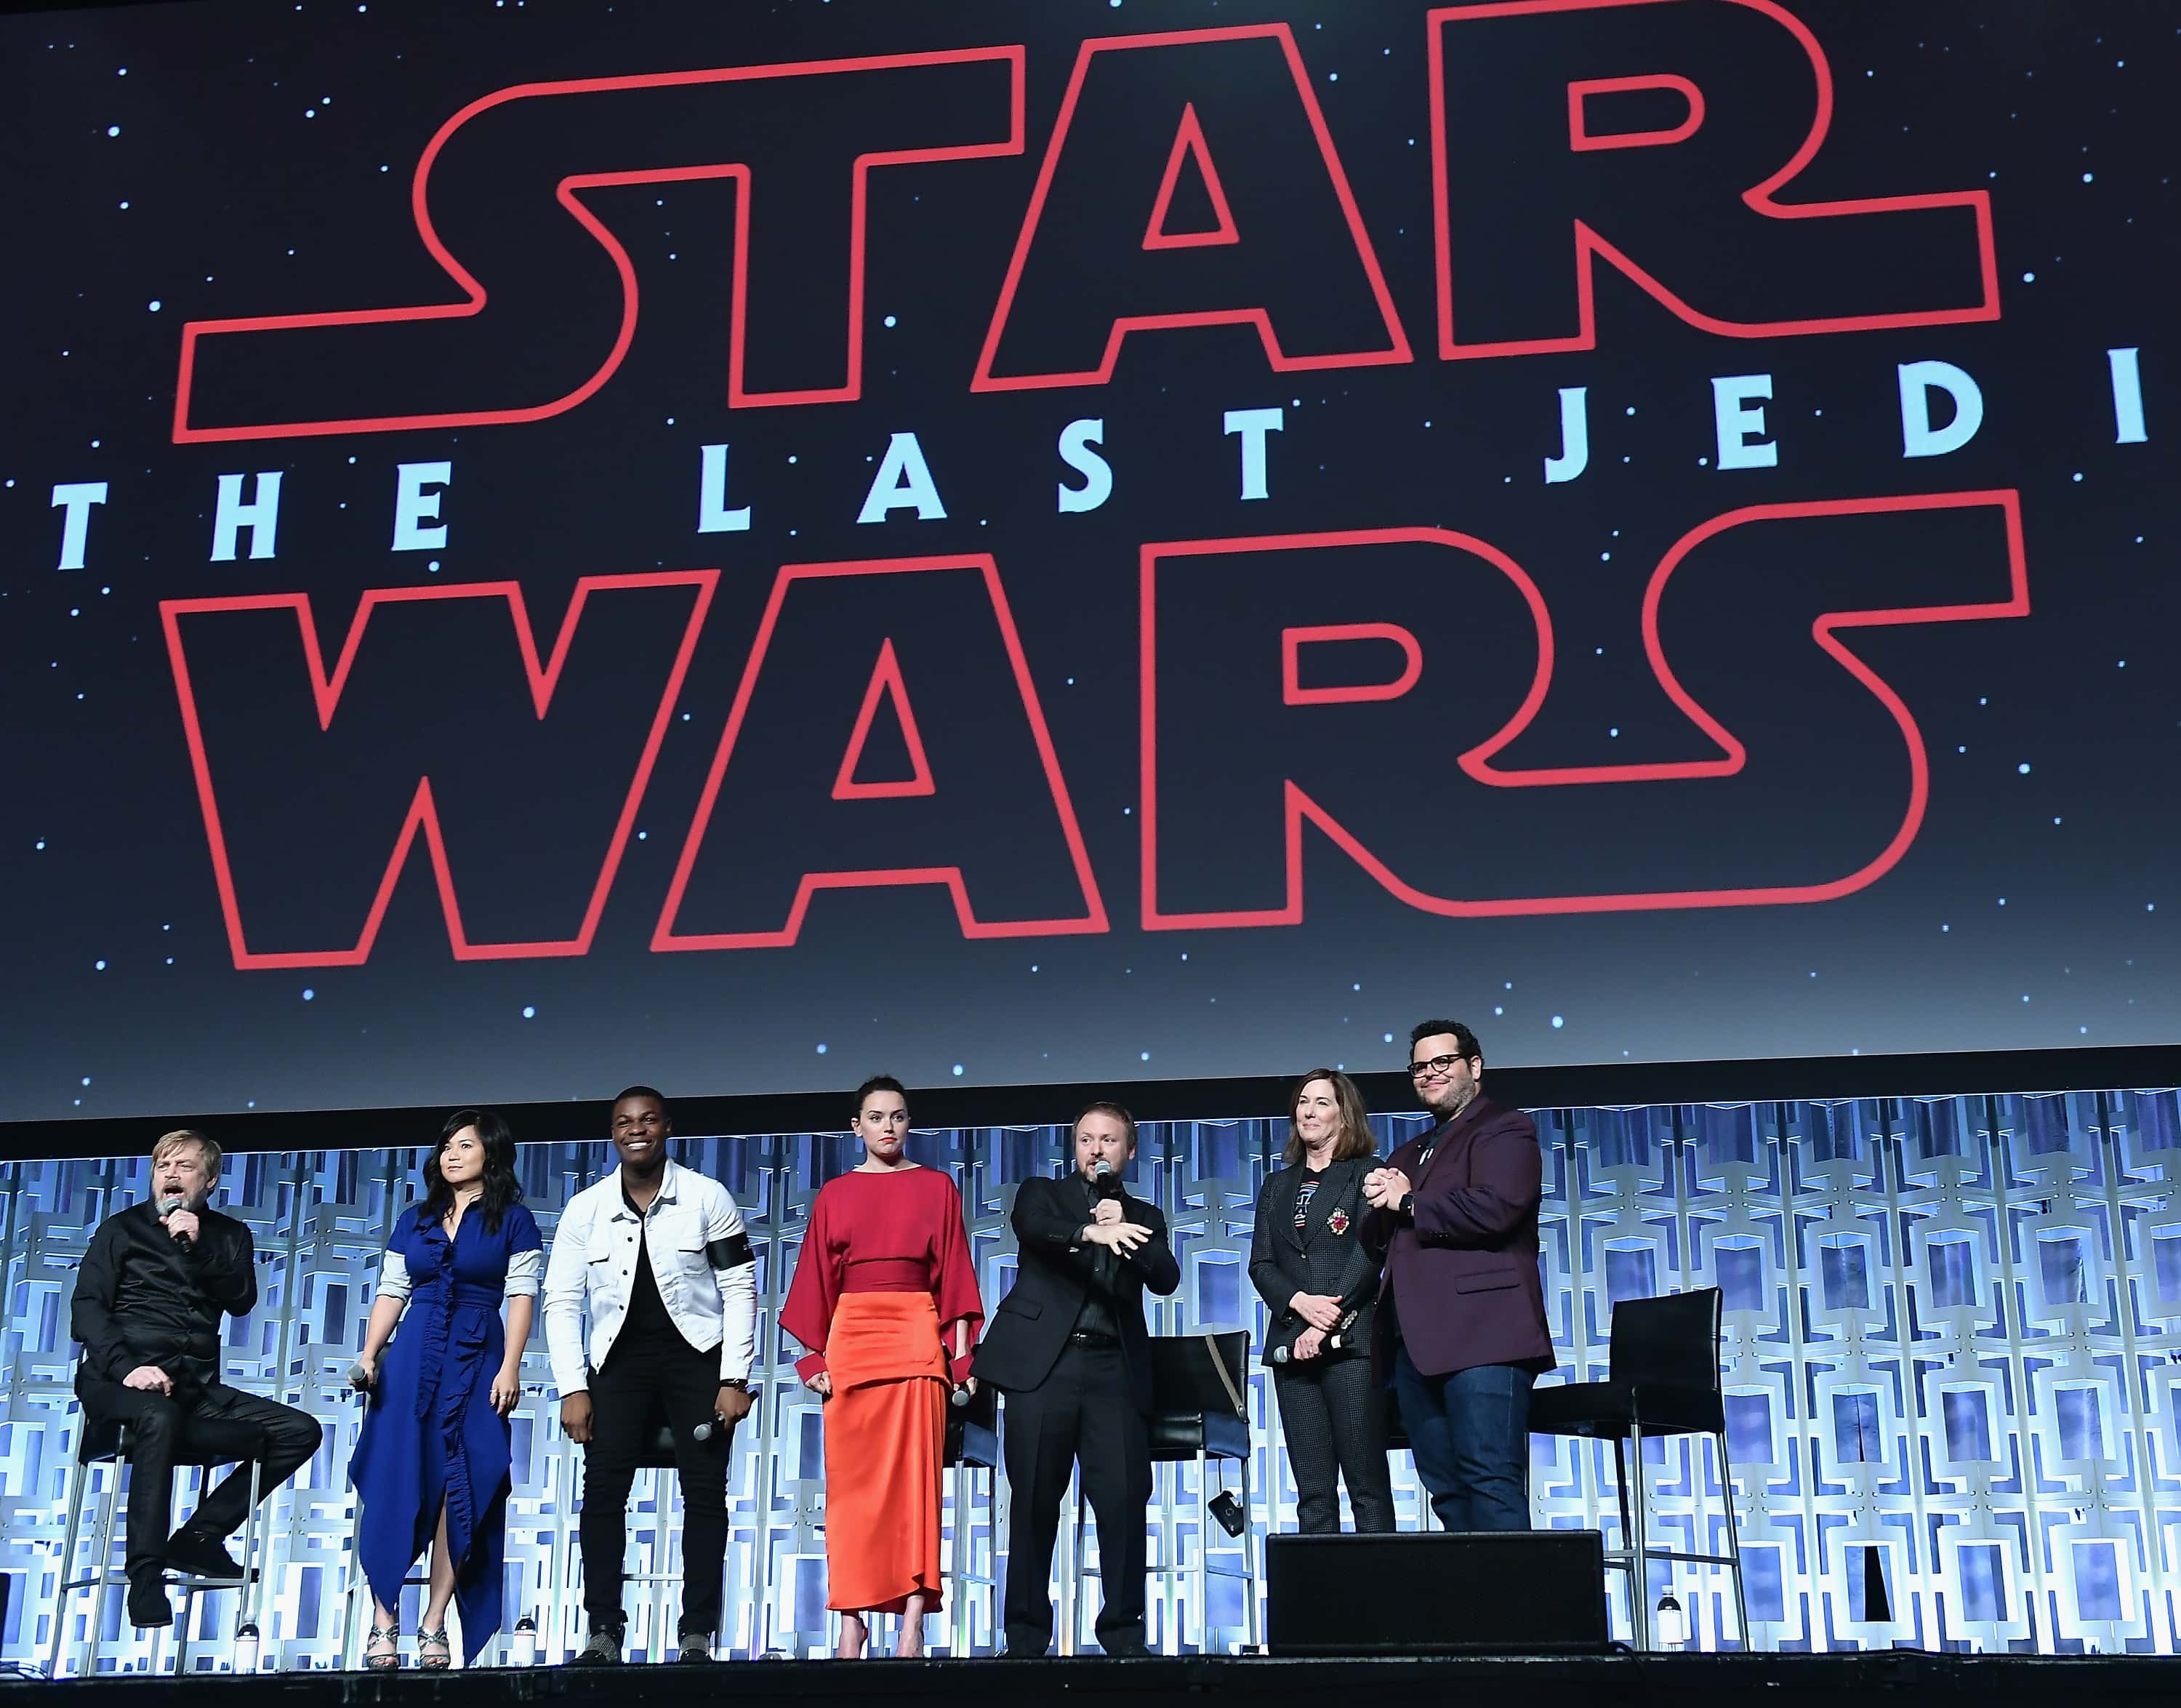 <p>Fans of <em>Star Trek </em>and <em>Star Wars</em> enjoy arguing over which space franchise is more superior, but in 2011, actor George Takei (Sulu) called for what he called "Star Peace," asking fans of both series to unite against <em>Twilight</em>, which he said was an "ominous threat to all science fiction".</p>